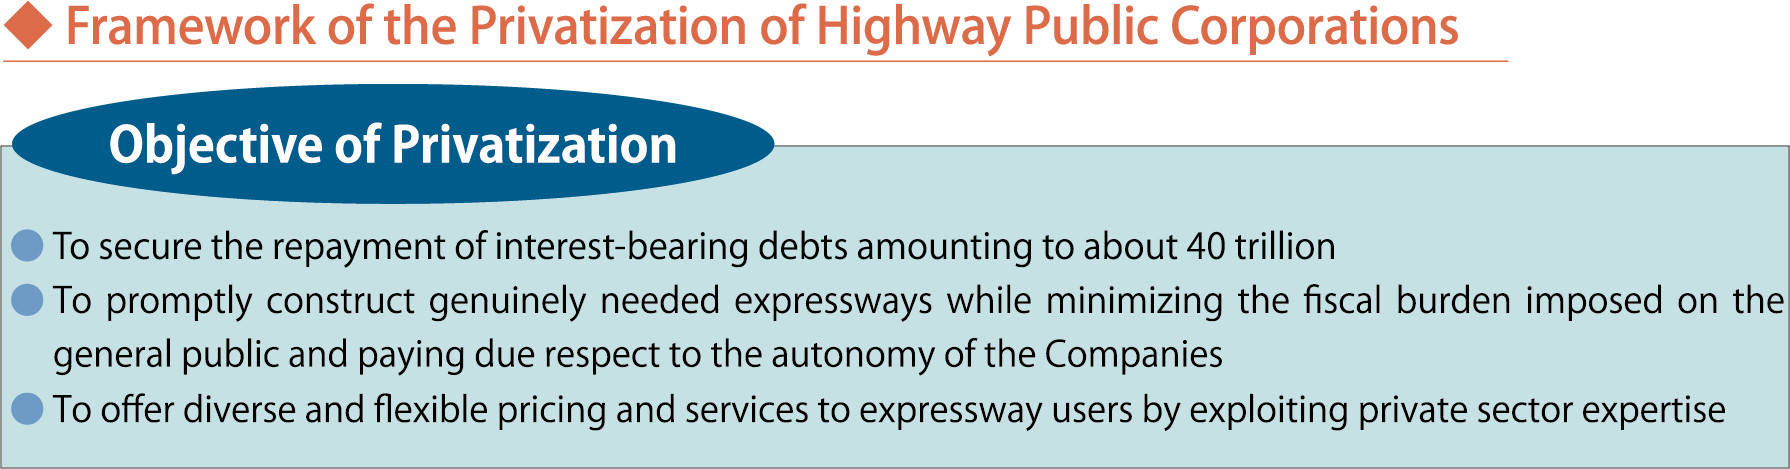 Framework of the Privatization of Highway Public Corporations. Objective of Privazation. To secure the repayment of interest-bearing debts amounting to about 40million. To promptly construct genuinely needed expressways while minimizing the fiscal burden imposed on the general public and paying due respect to the autonomy of the Companies. To offer diverse and flexible pricing and services to expressway users by exploiting private sector expertise.